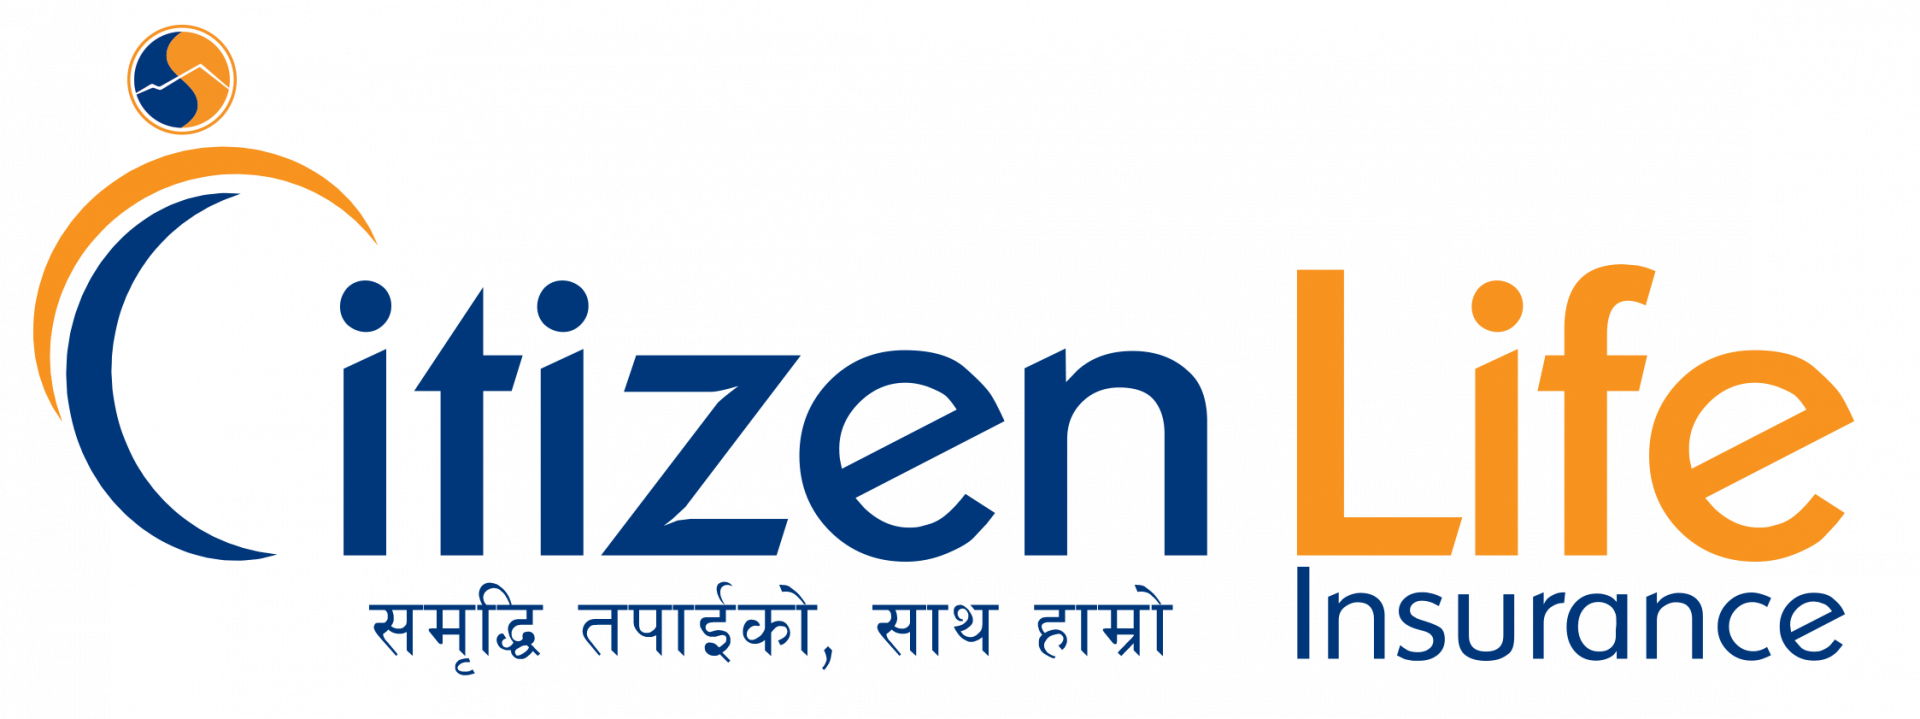 Citizen Life Insurance Mulls to Issue IPO at Premium